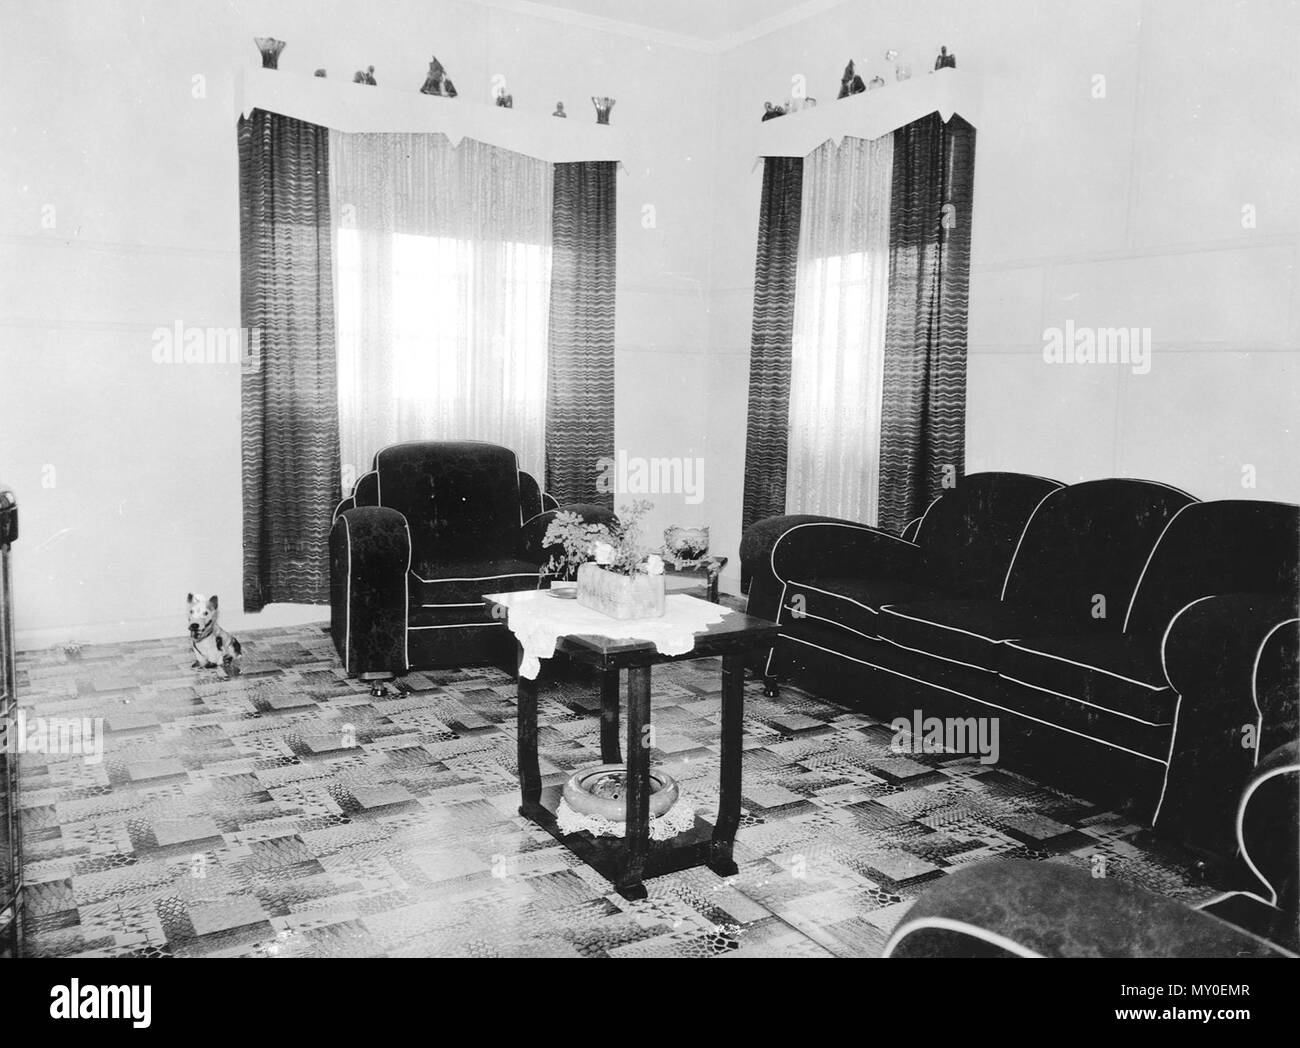 State rental house interior, Serviceton, c 1953. The tiny township of Serviceton was selected in 1946 by the Serviceton Co-operative Society for development to help meet the shortage of post-war housing. The Society purchased 850 acres of land which was taken over by the Queensland Housing Commission in 1950, to which it added another 200 acres. The area was renamed Inala in 1953 to avoid confusion with the town of Serviceton in South Australia.  Inala was planned as a satellite town of Brisbane and houses were largely Modernist Revival style with elements of Art Deco. Stock Photo